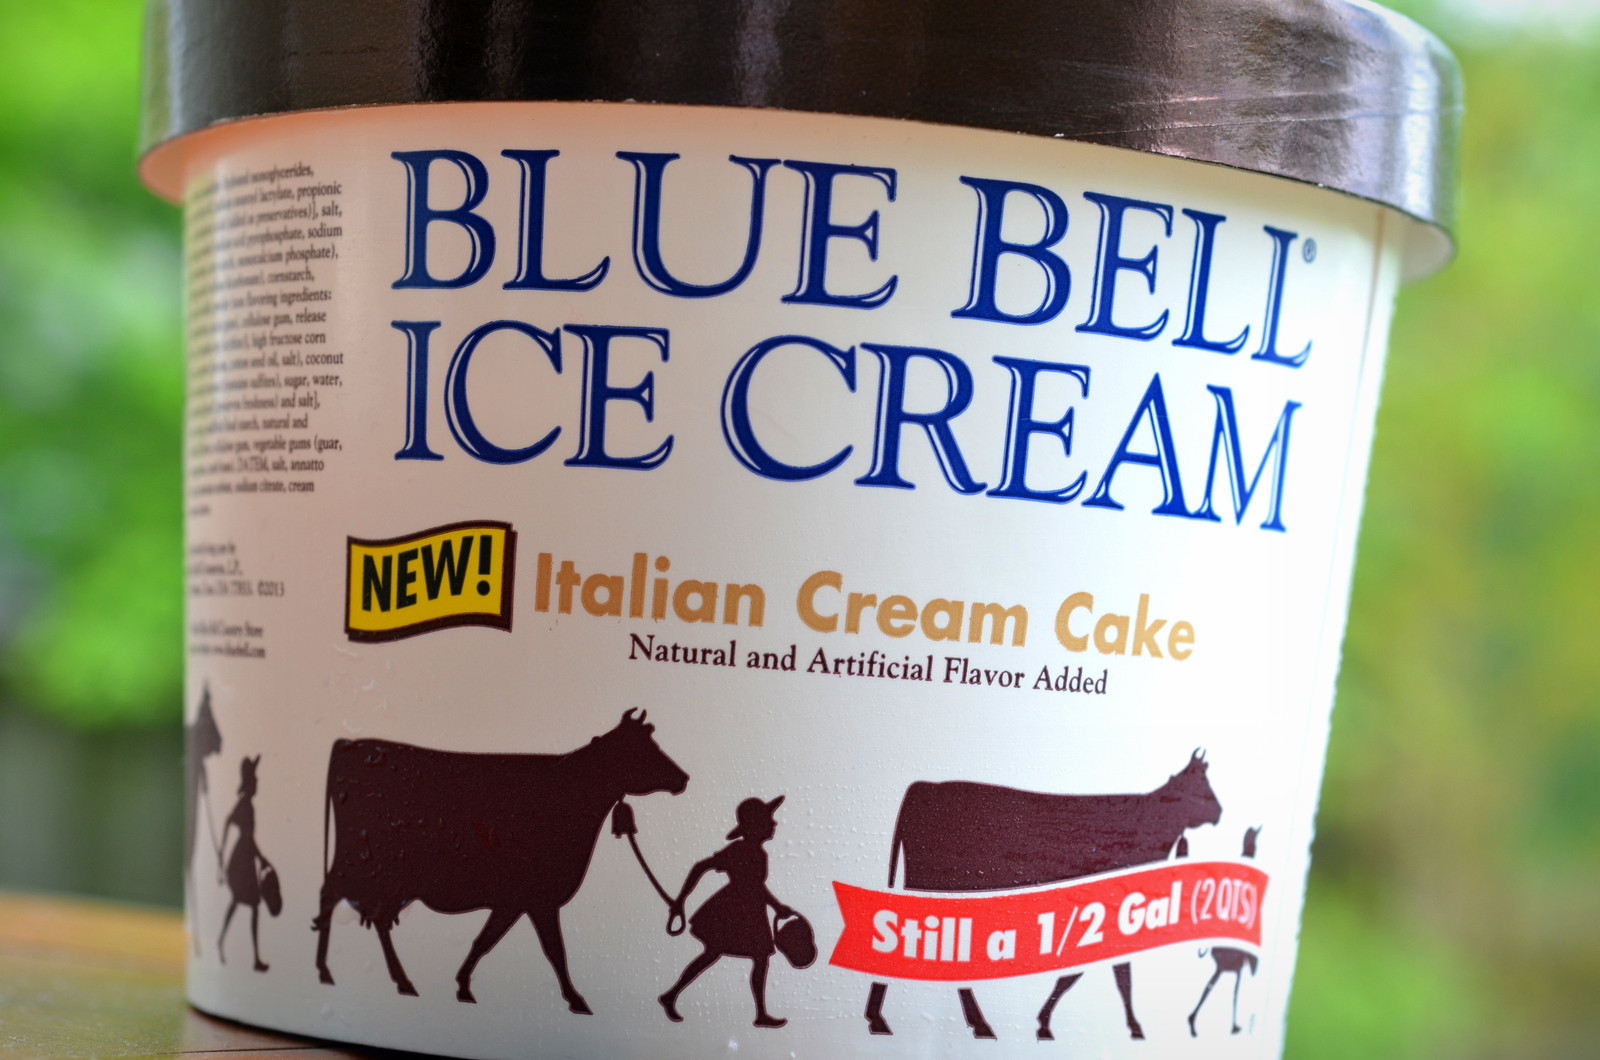 Blue Bell Birthday Cake Ice Cream
 food and ice cream recipes REVIEW Blue Bell Italian